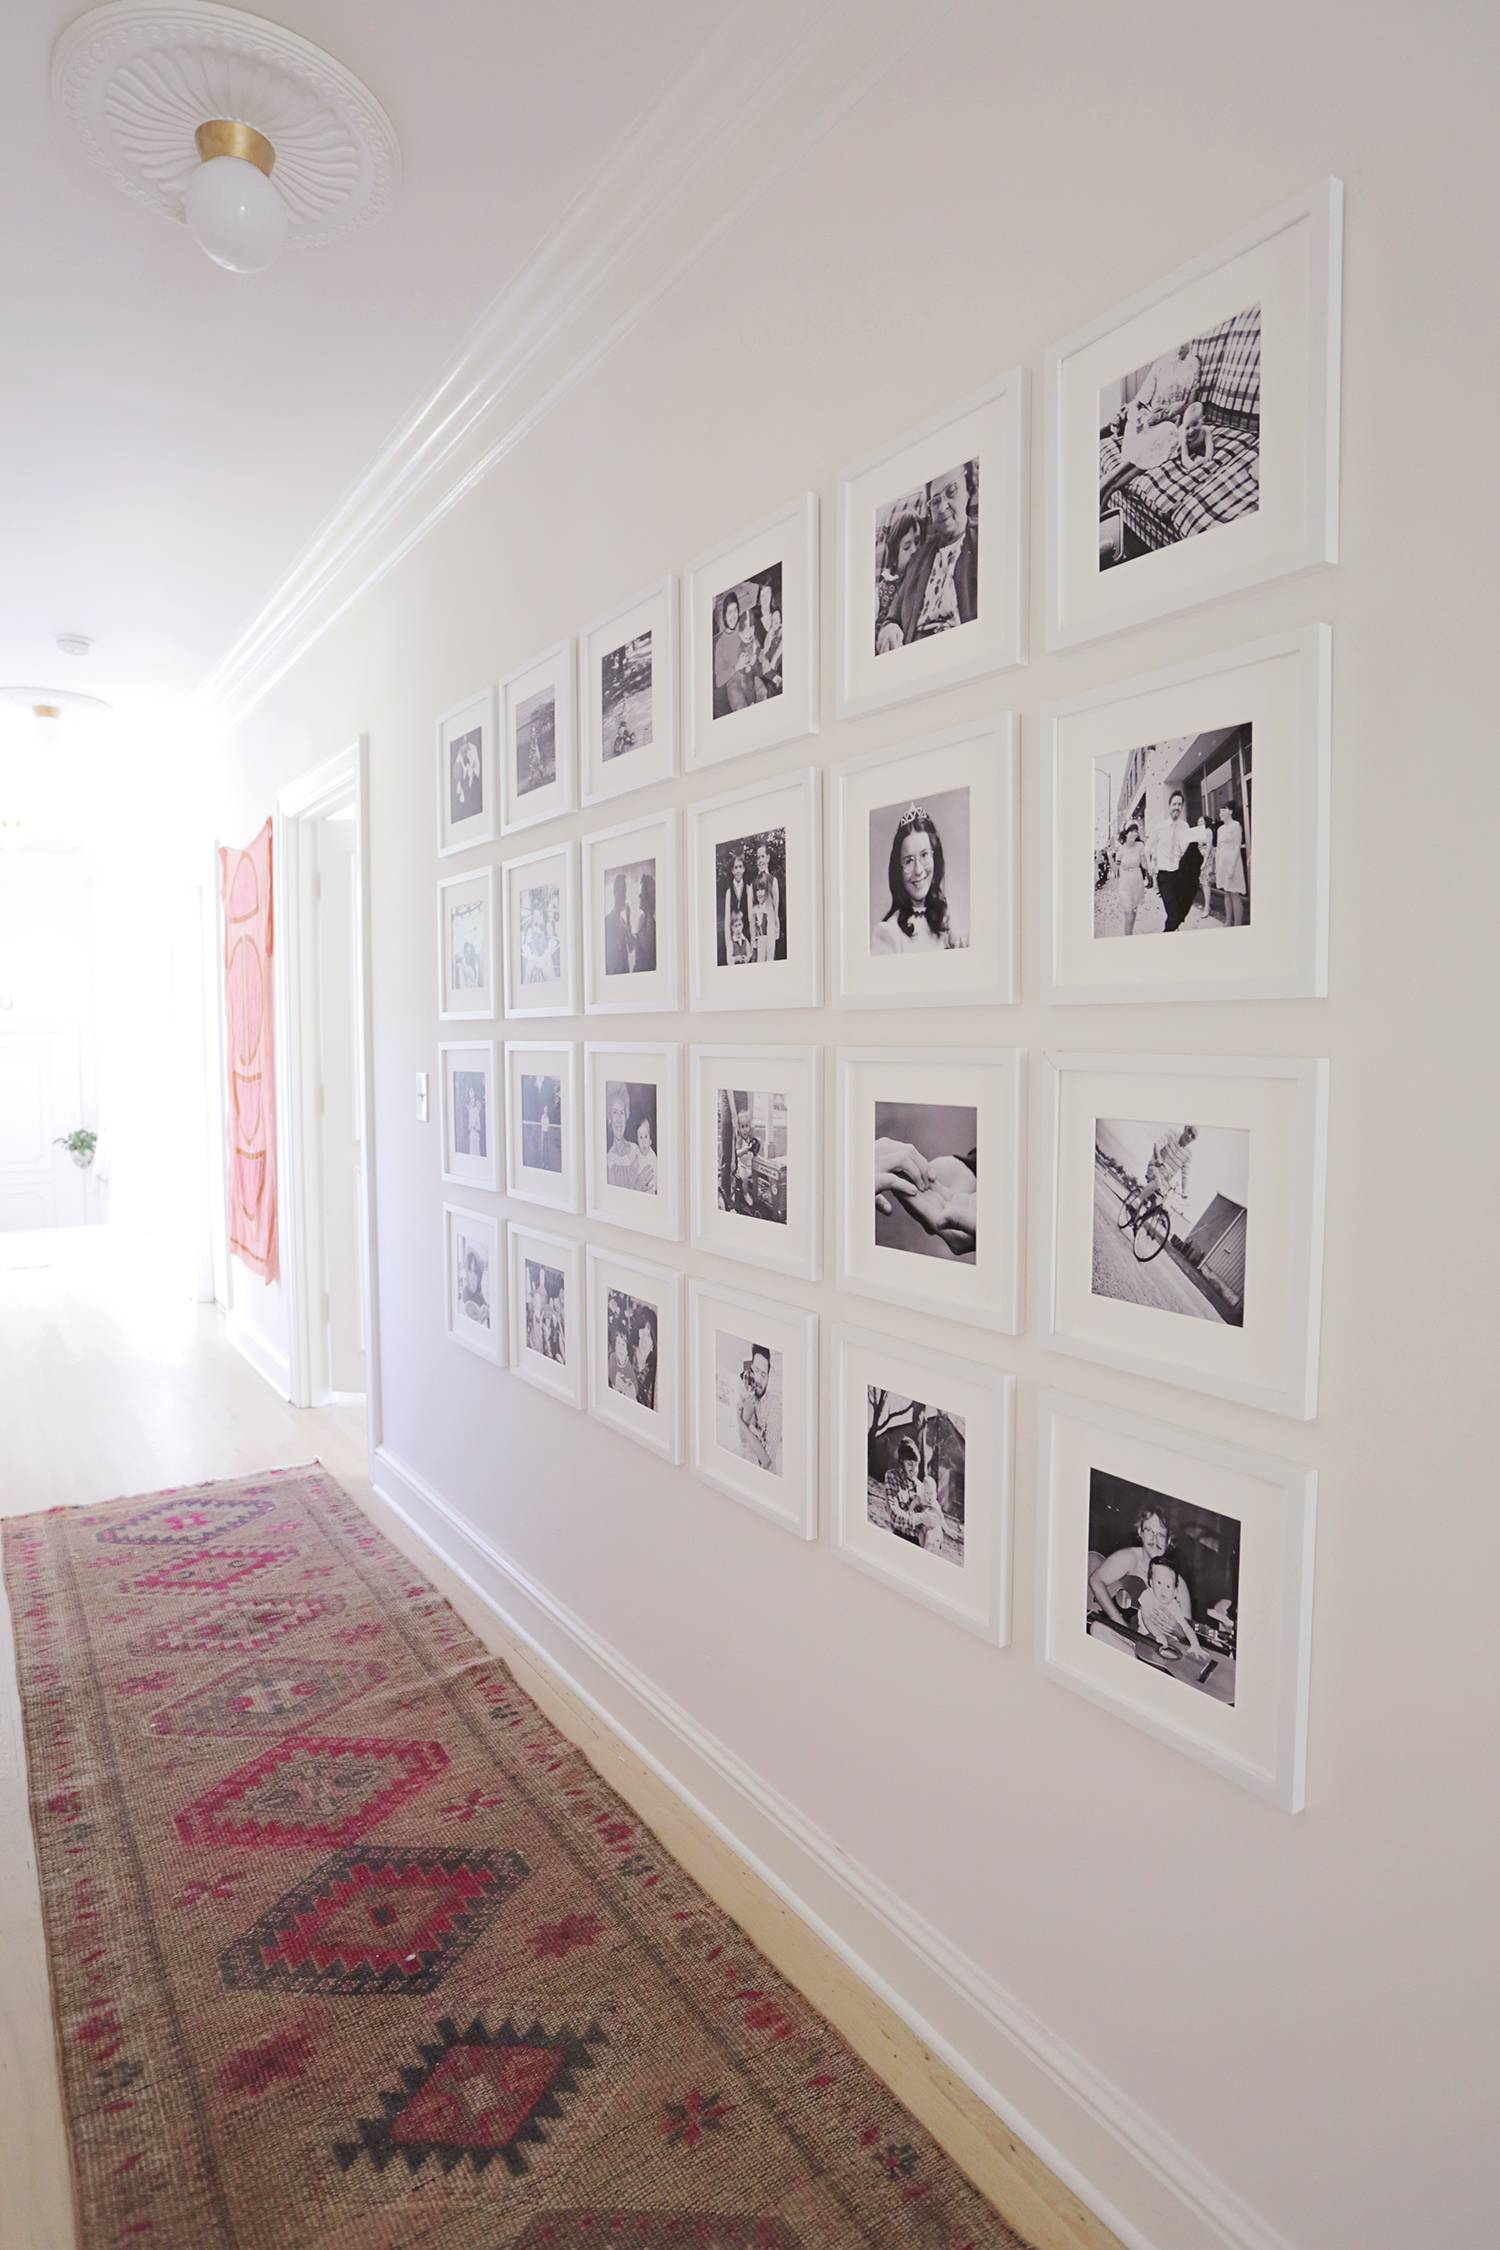 A hallway with a red and brown diamond decorated runner rug and four rows of six, black and white pictures on the wall.